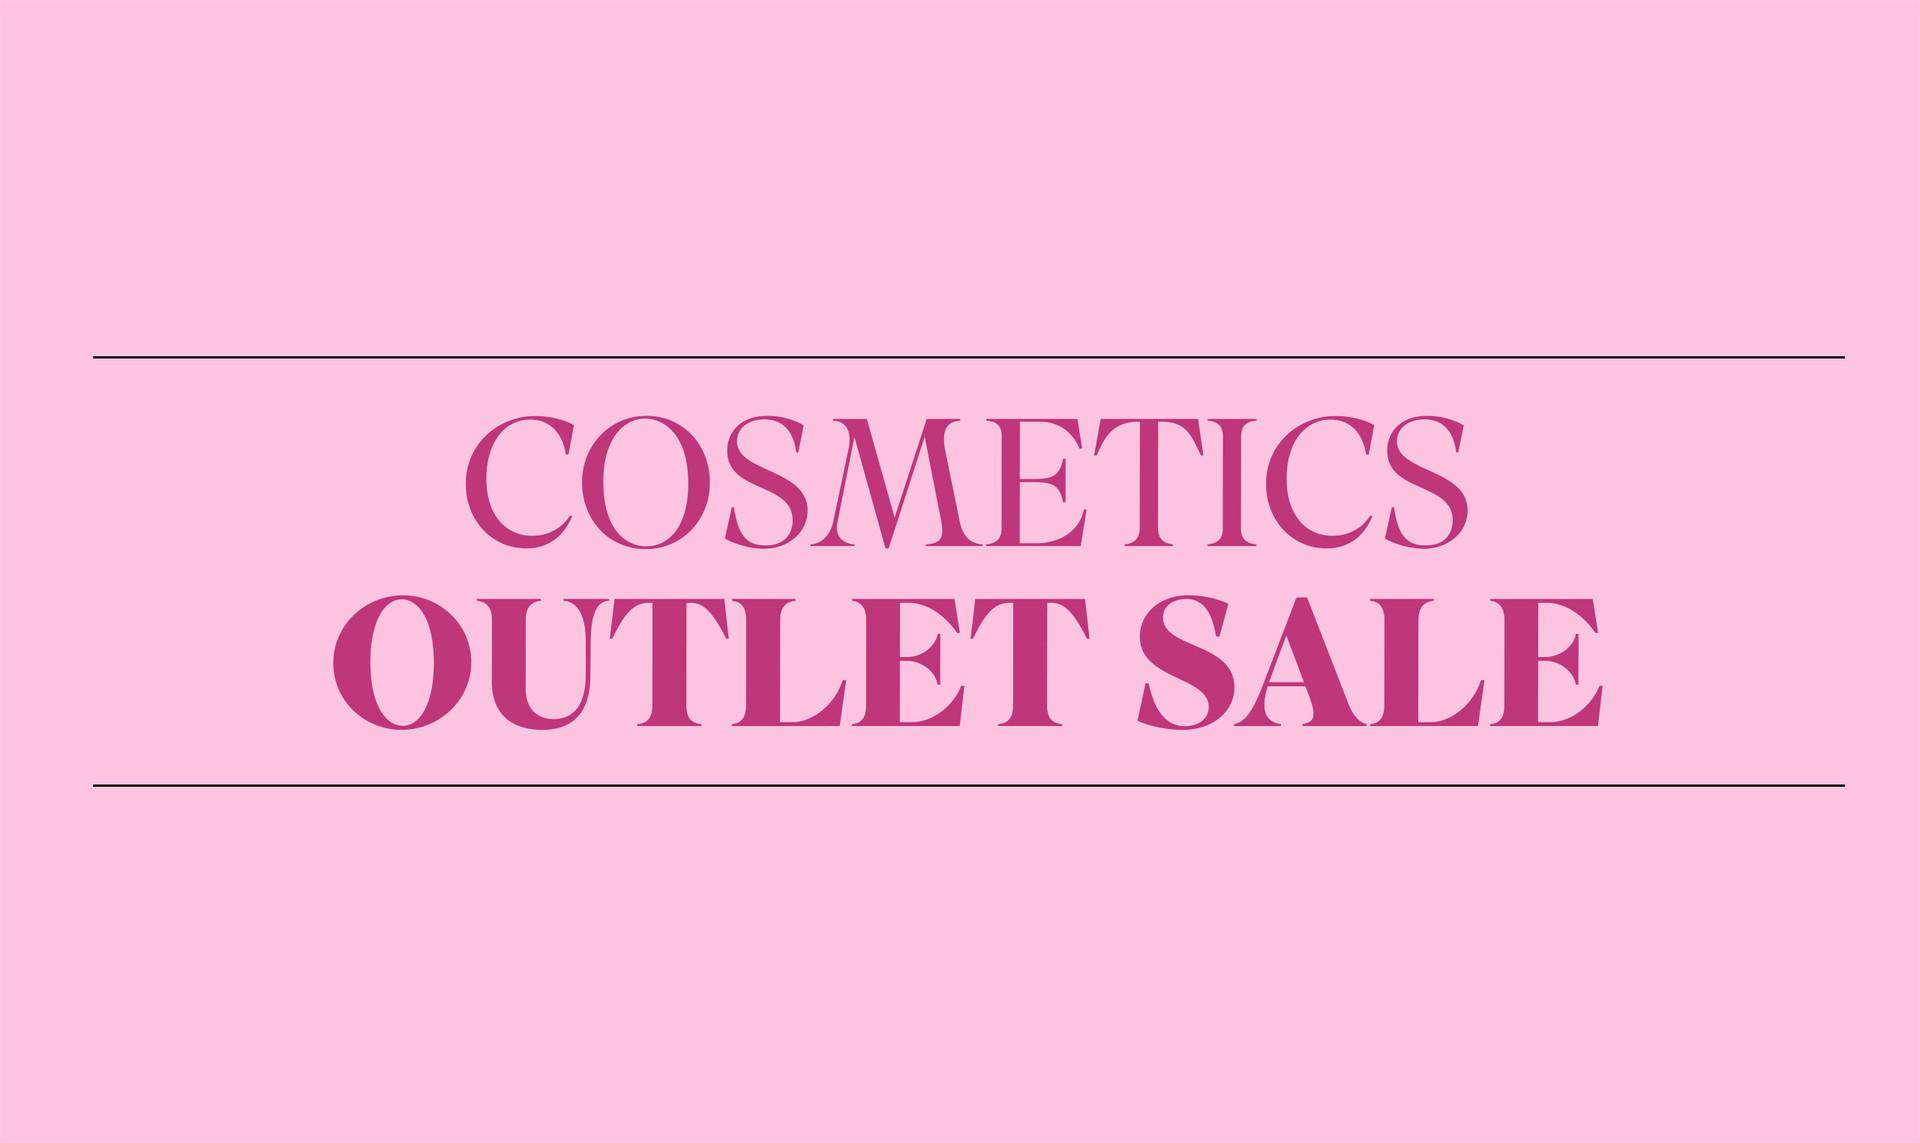 Cosmetics Outlet Sale